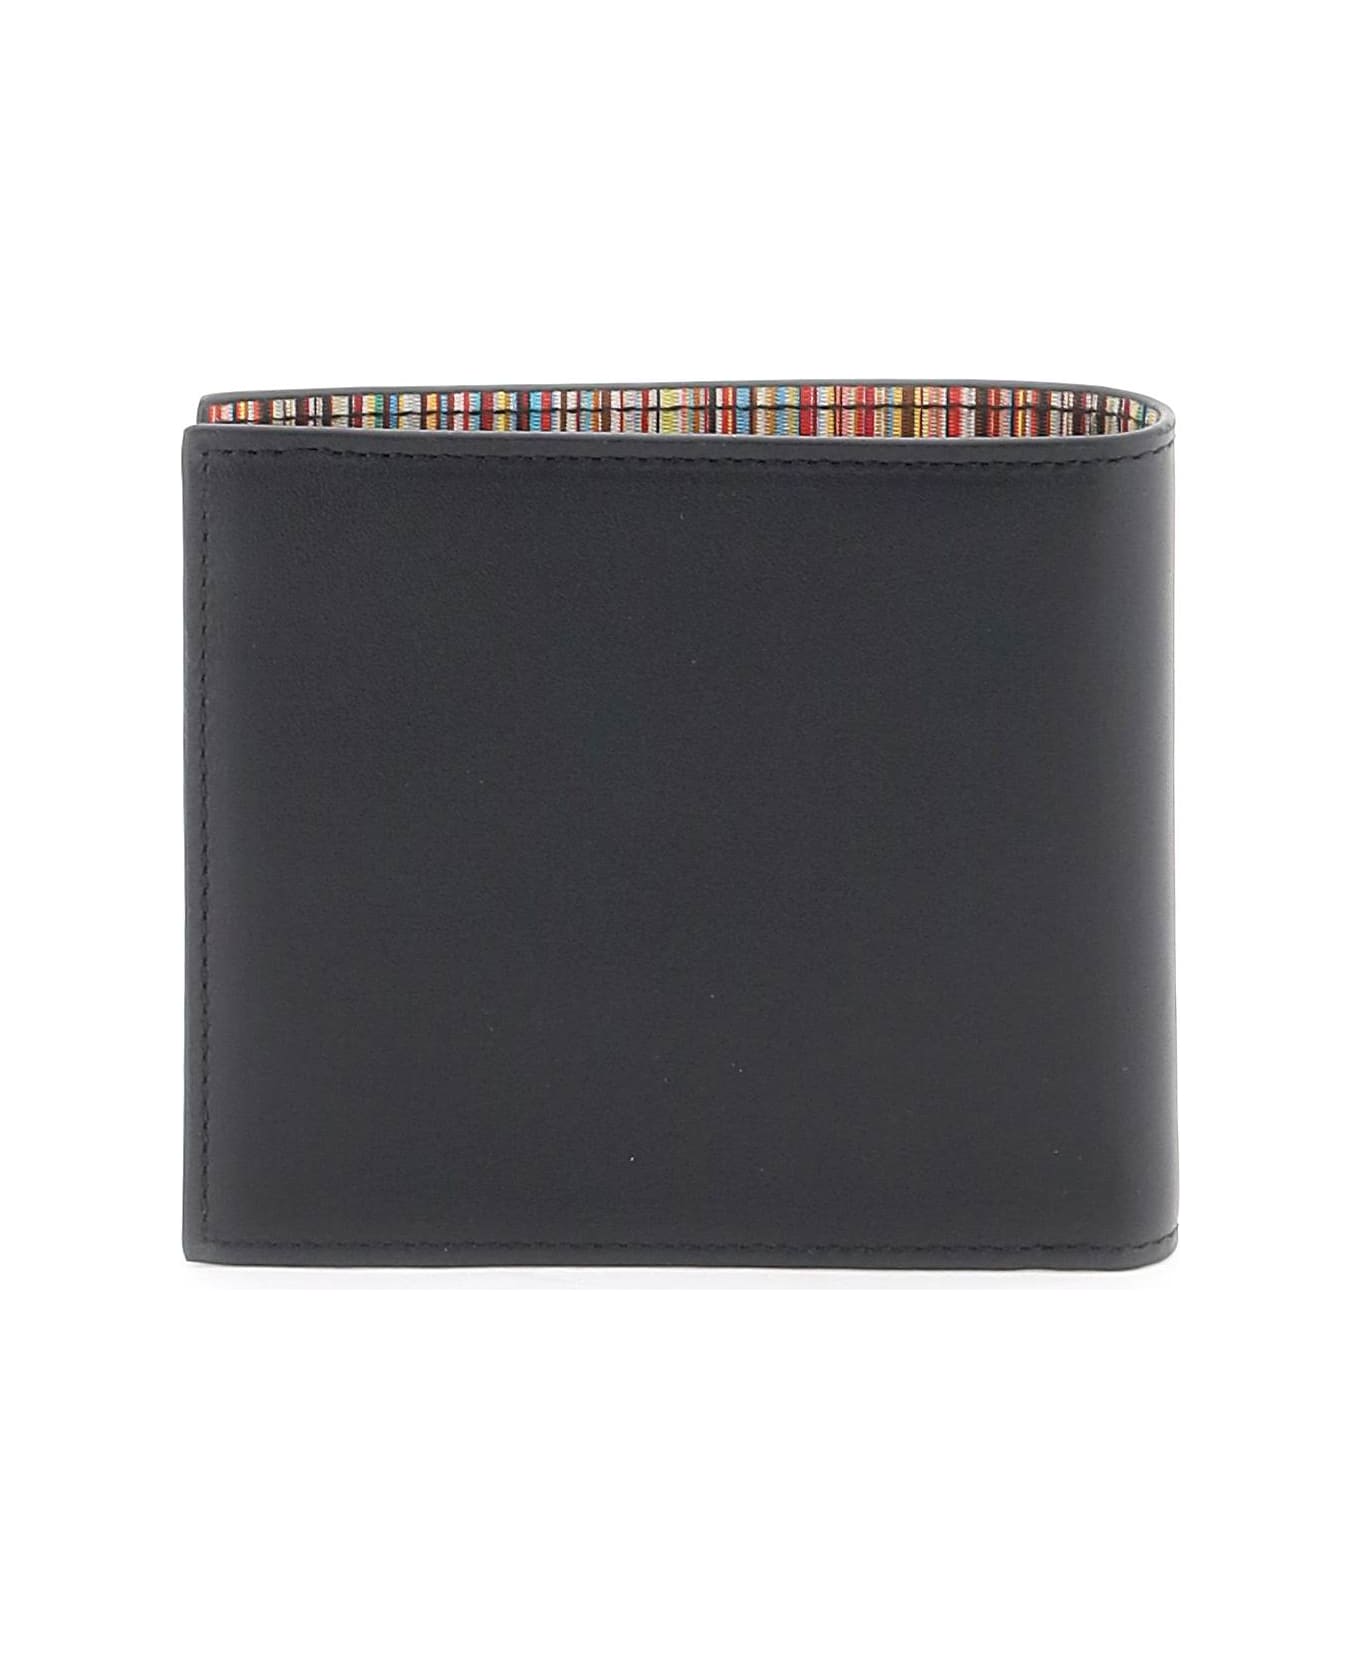 PS by Paul Smith Signature Stripe Wallet - Black